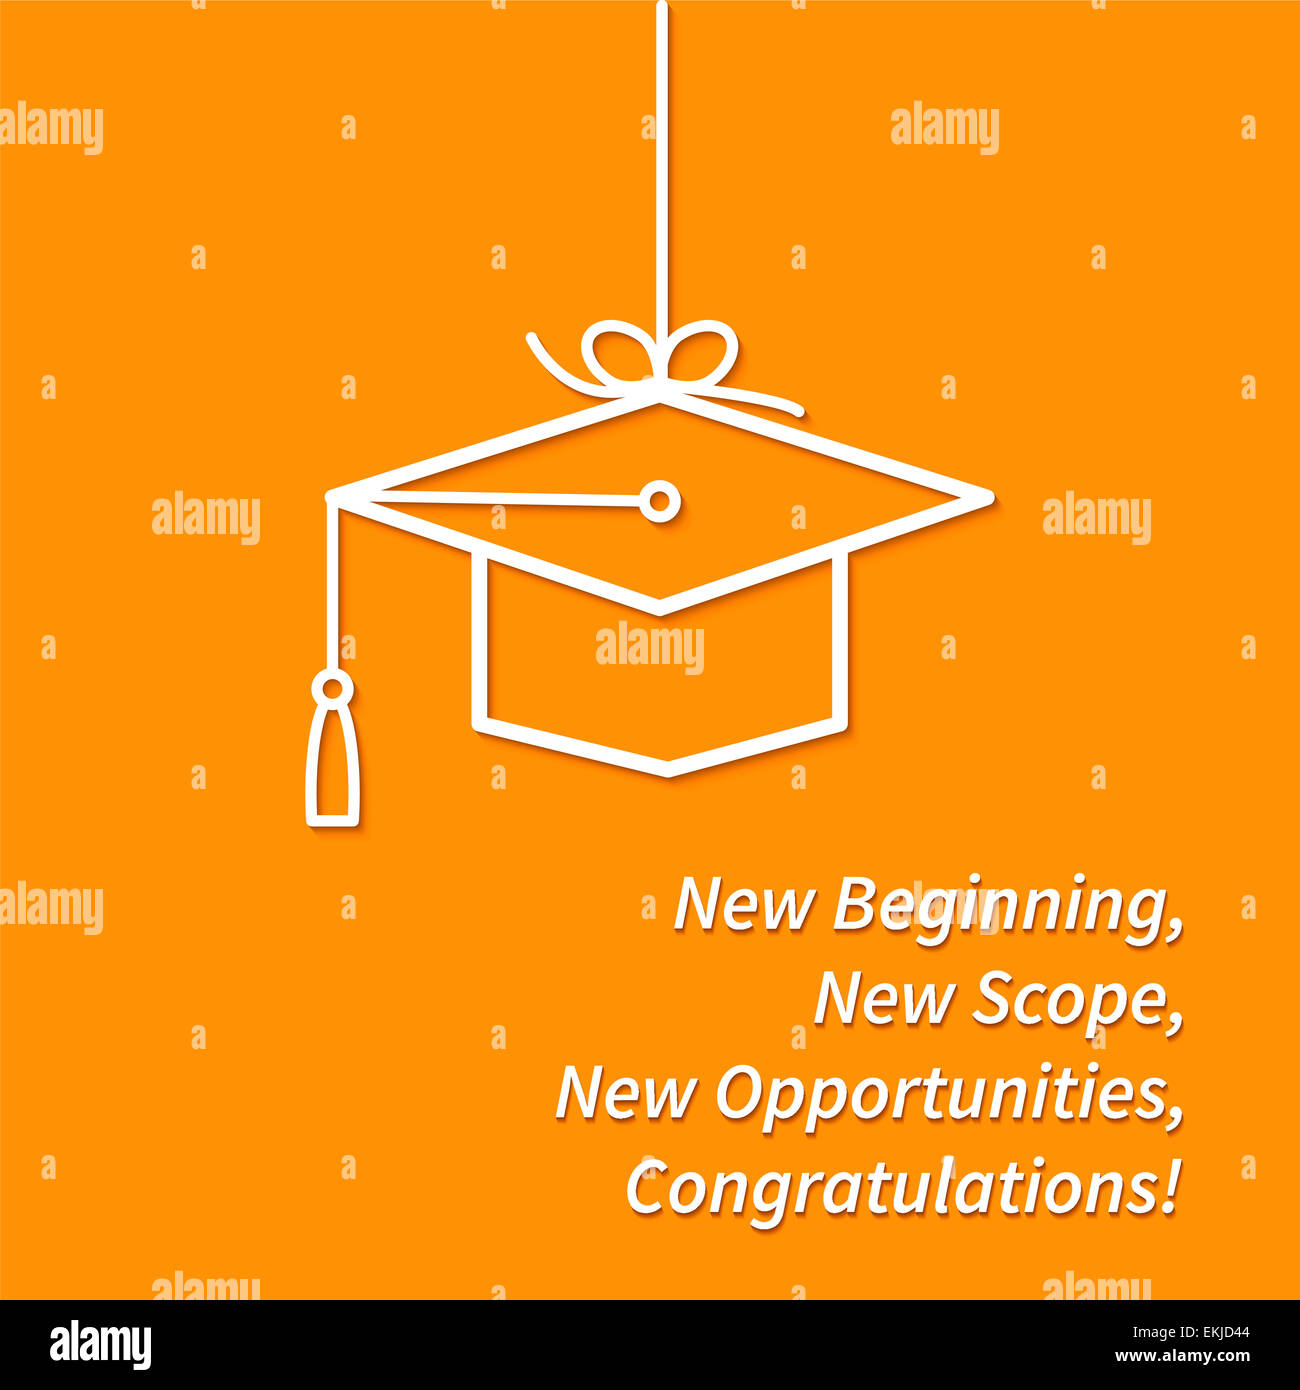 Greeting Card With Congratulations Graduate Completion of Studies Stock Photo